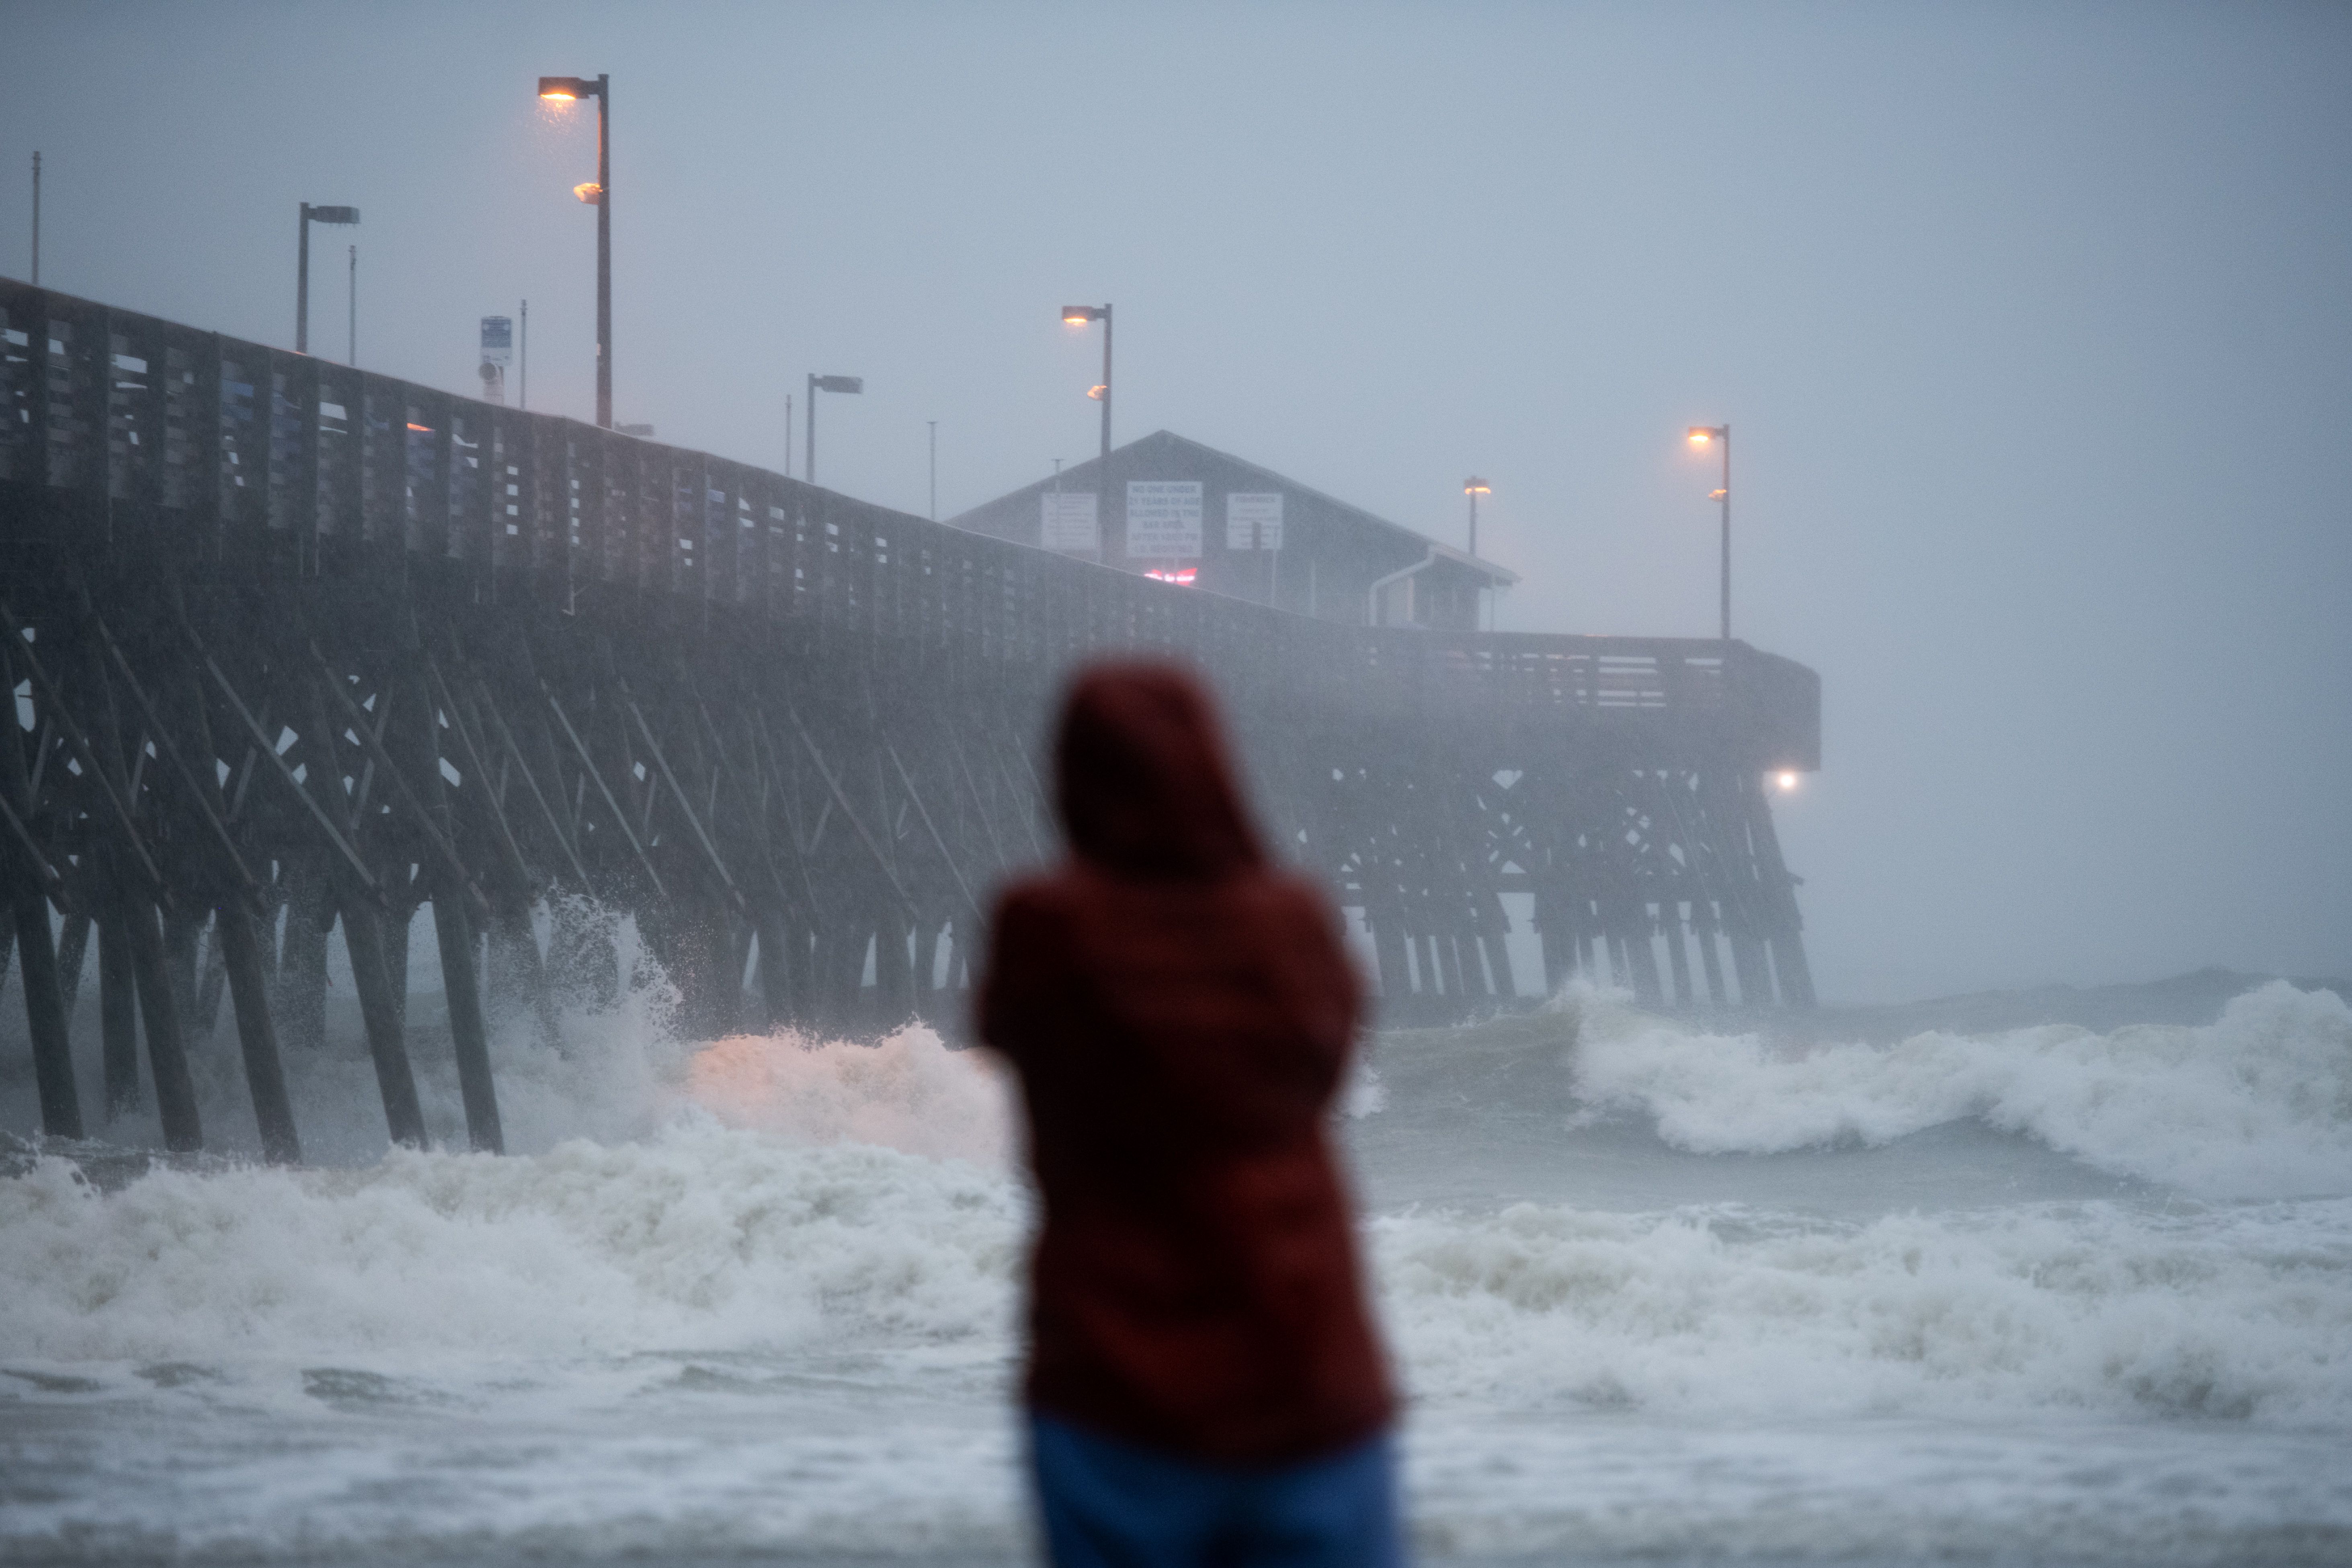 A person watches waves crashing against the Pier at Garden City August 3, 2020 in Garden City, South Carolina.